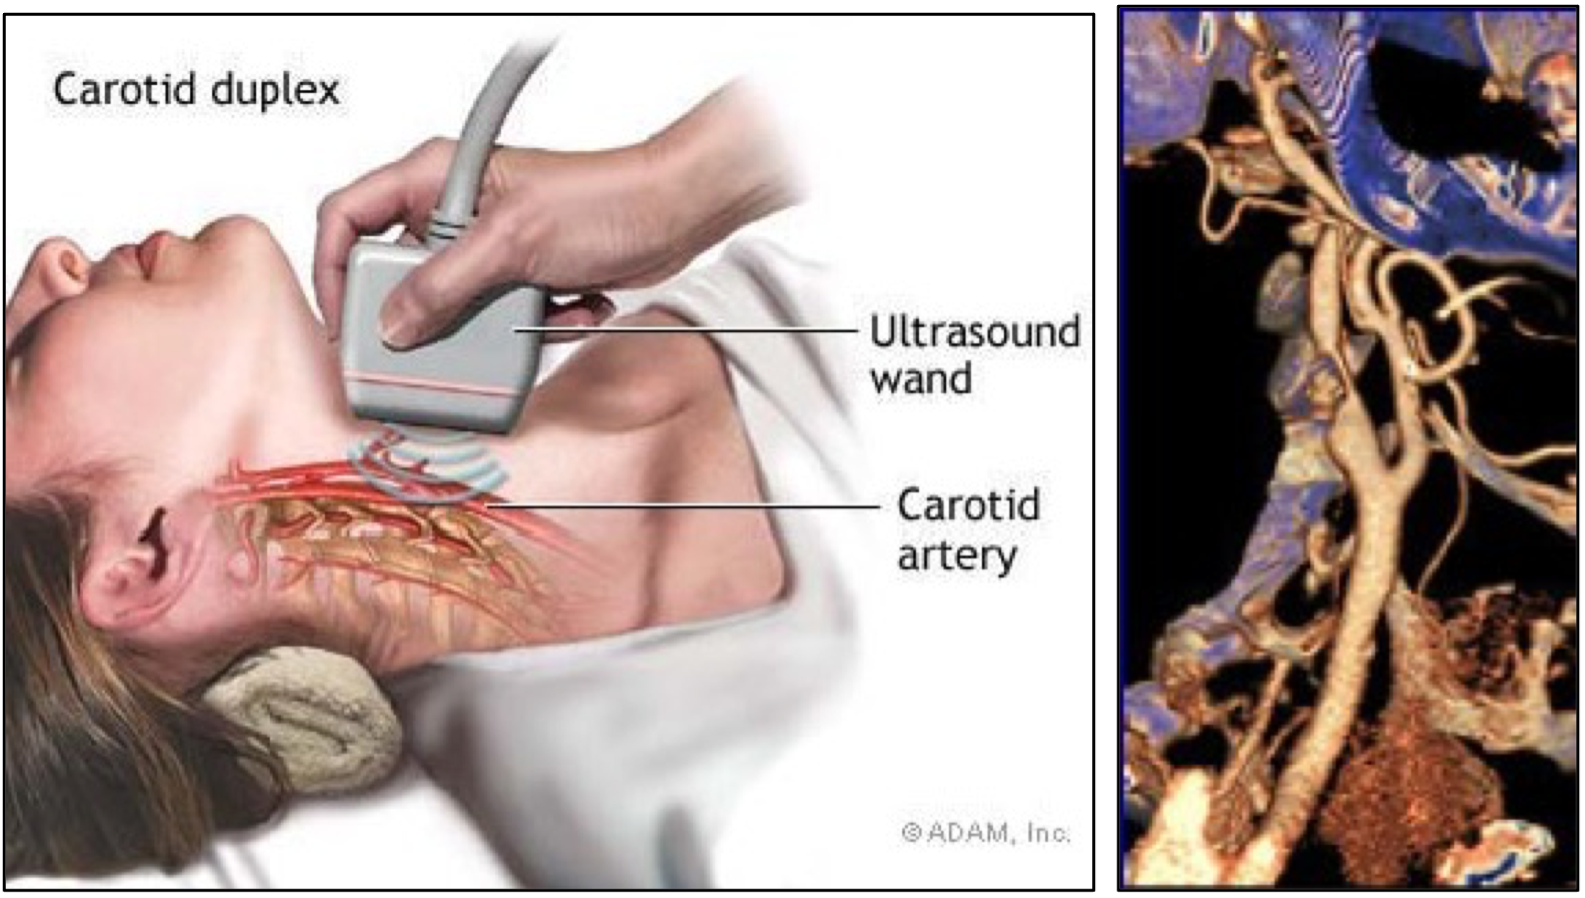 graphic showing ultrasound wand over carotid artery